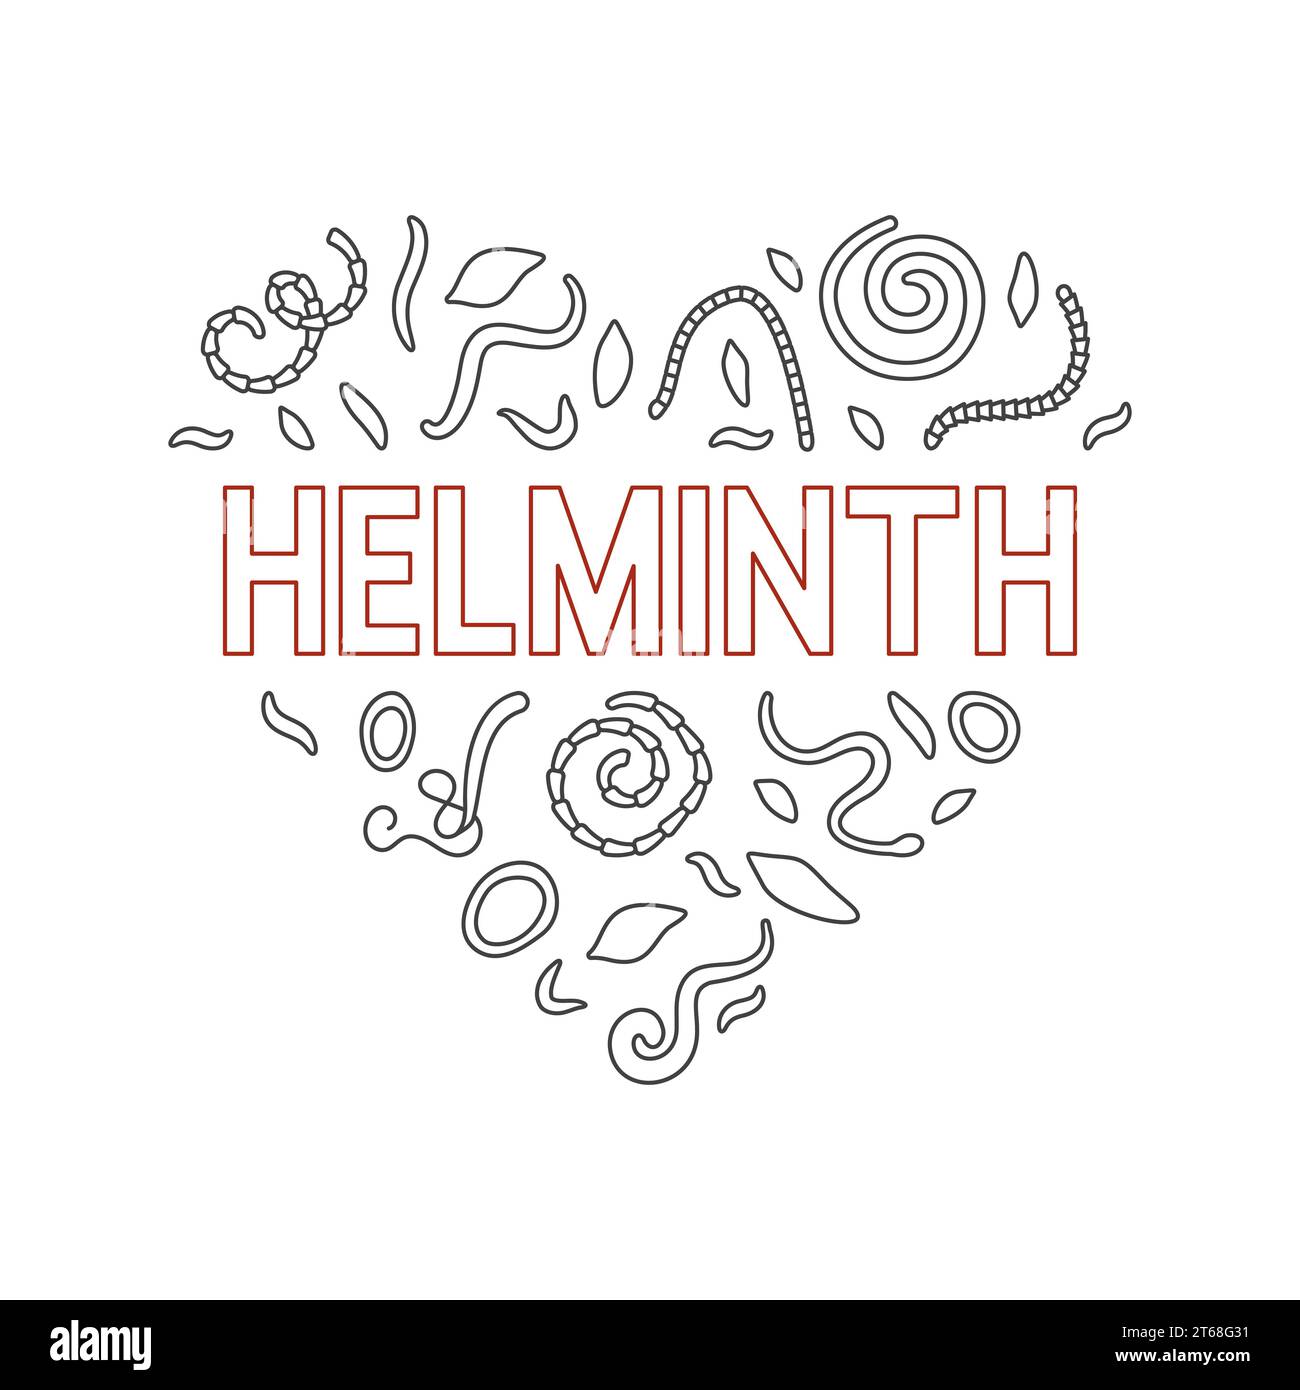 Helminth vector concept heart shaped minimal banner. Illustration with Ascariasis, Hookworms, Pinworms linear signs Stock Vector